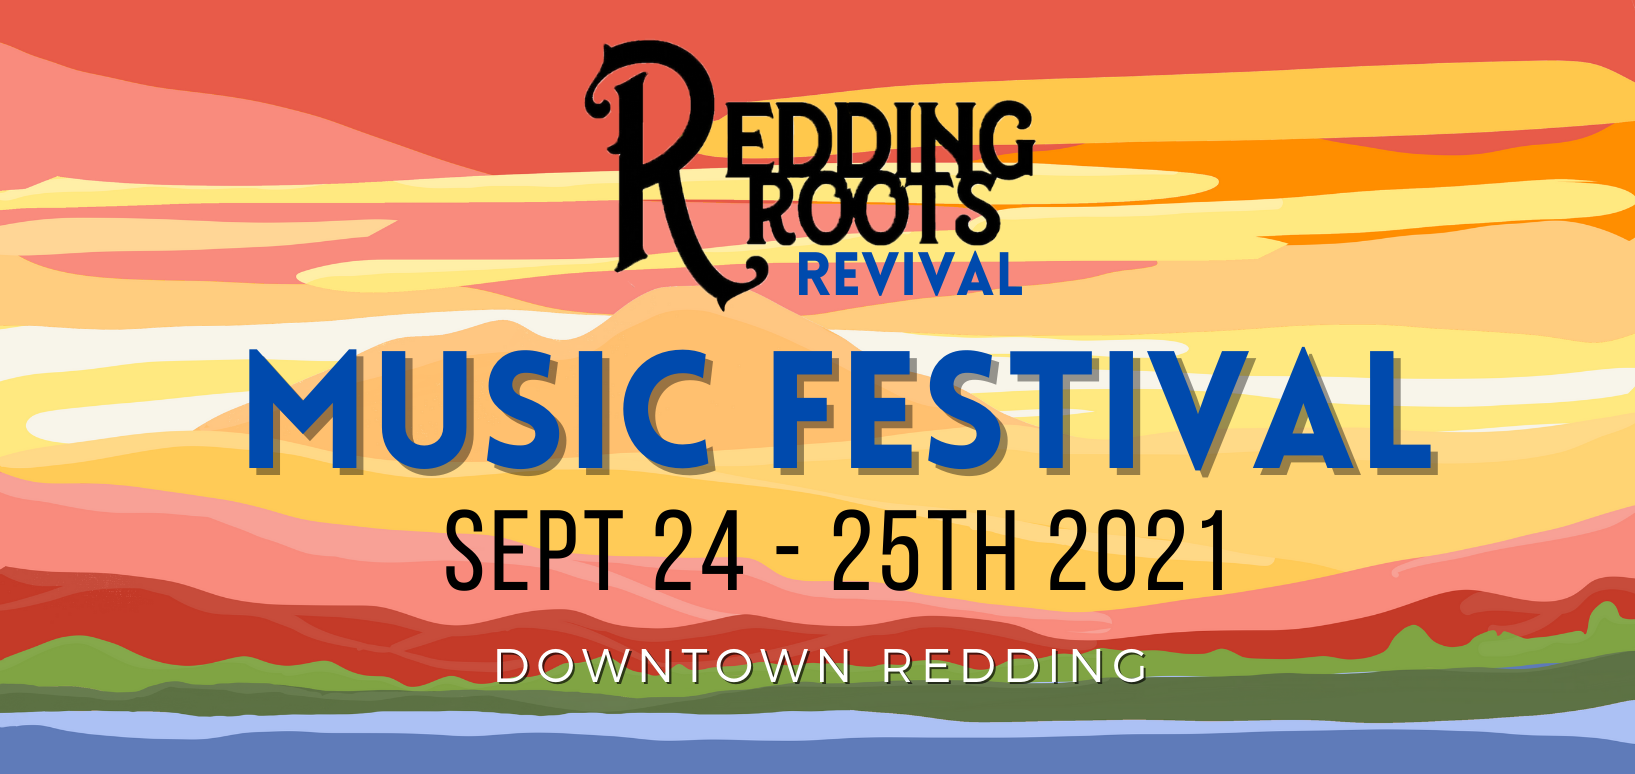 Redding Roots Revival